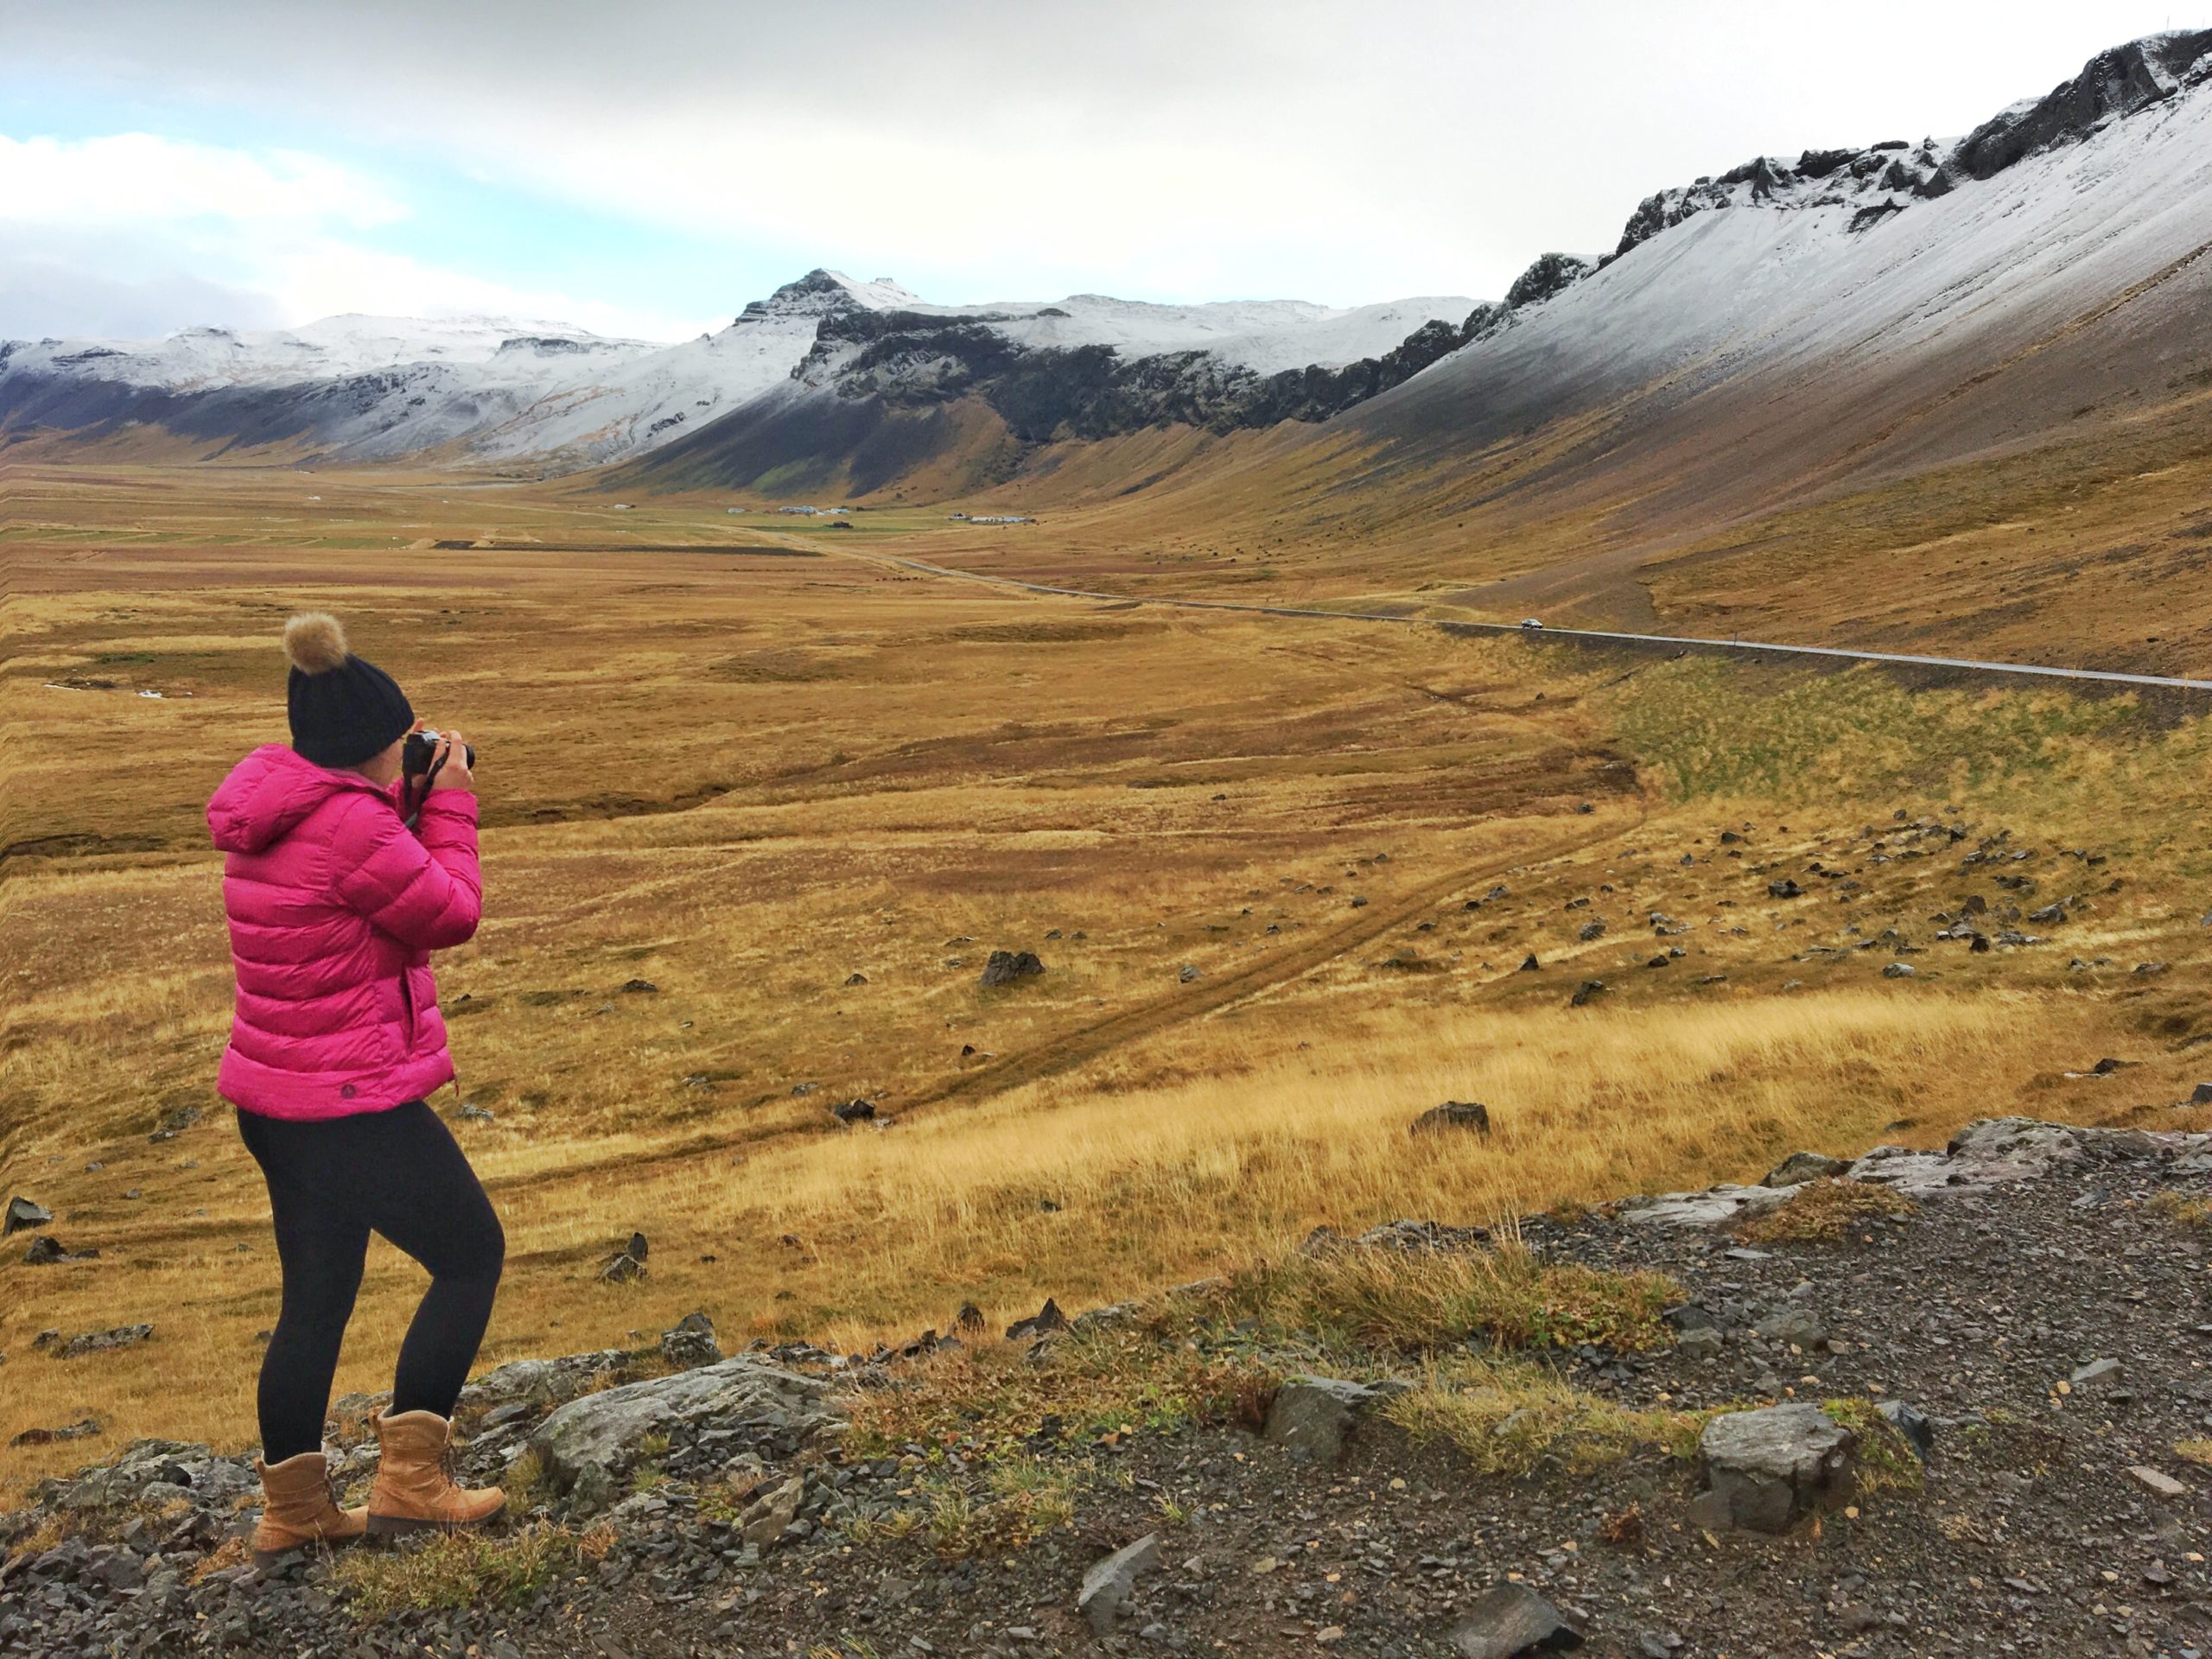 The Fashion Girl's Guide to Iceland: What to Pack, See and Eat